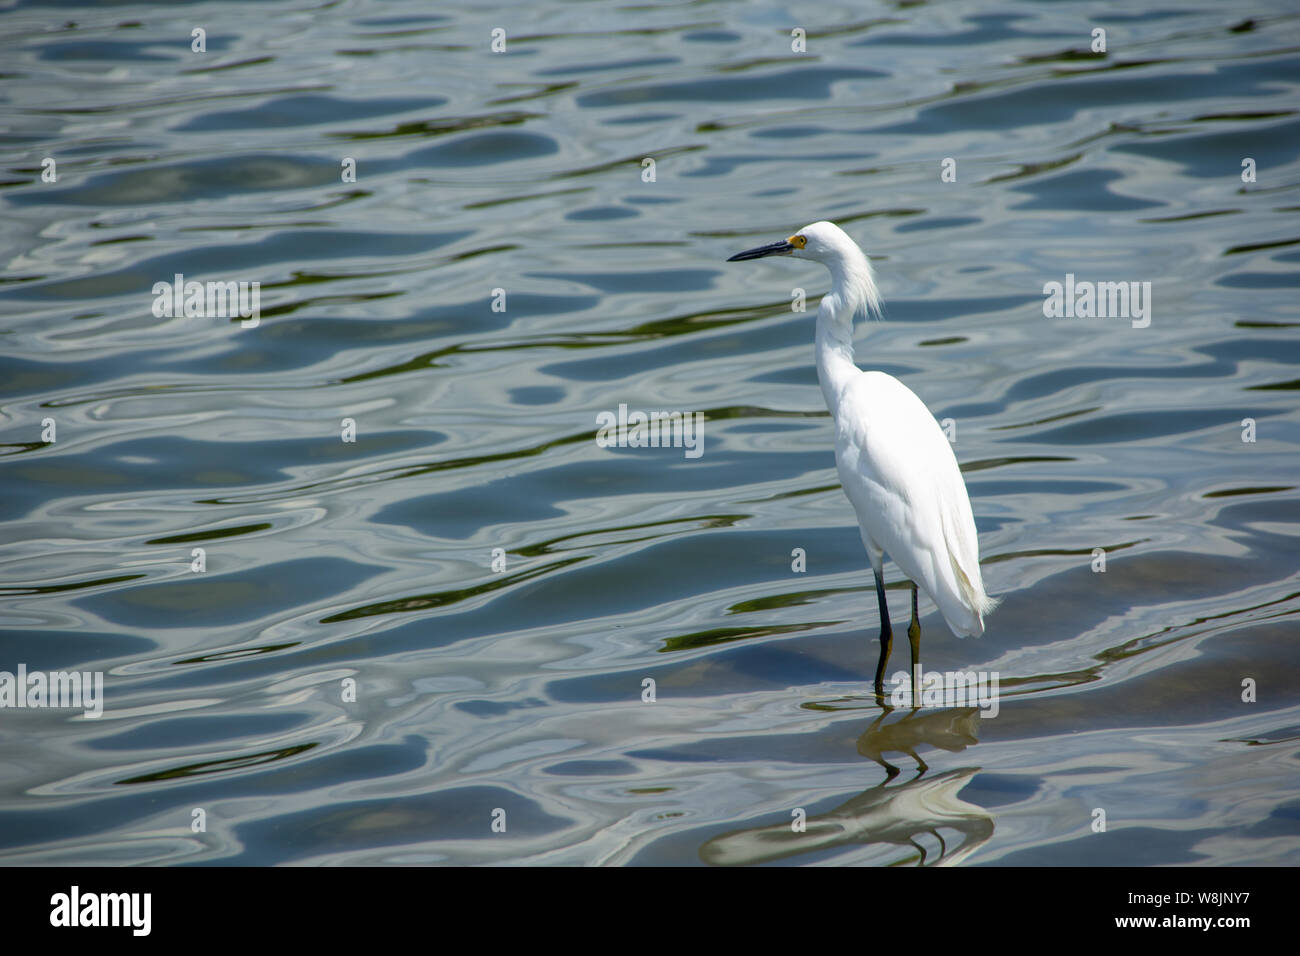 White heron wading in the water, looks out across the lake. Stock Photo